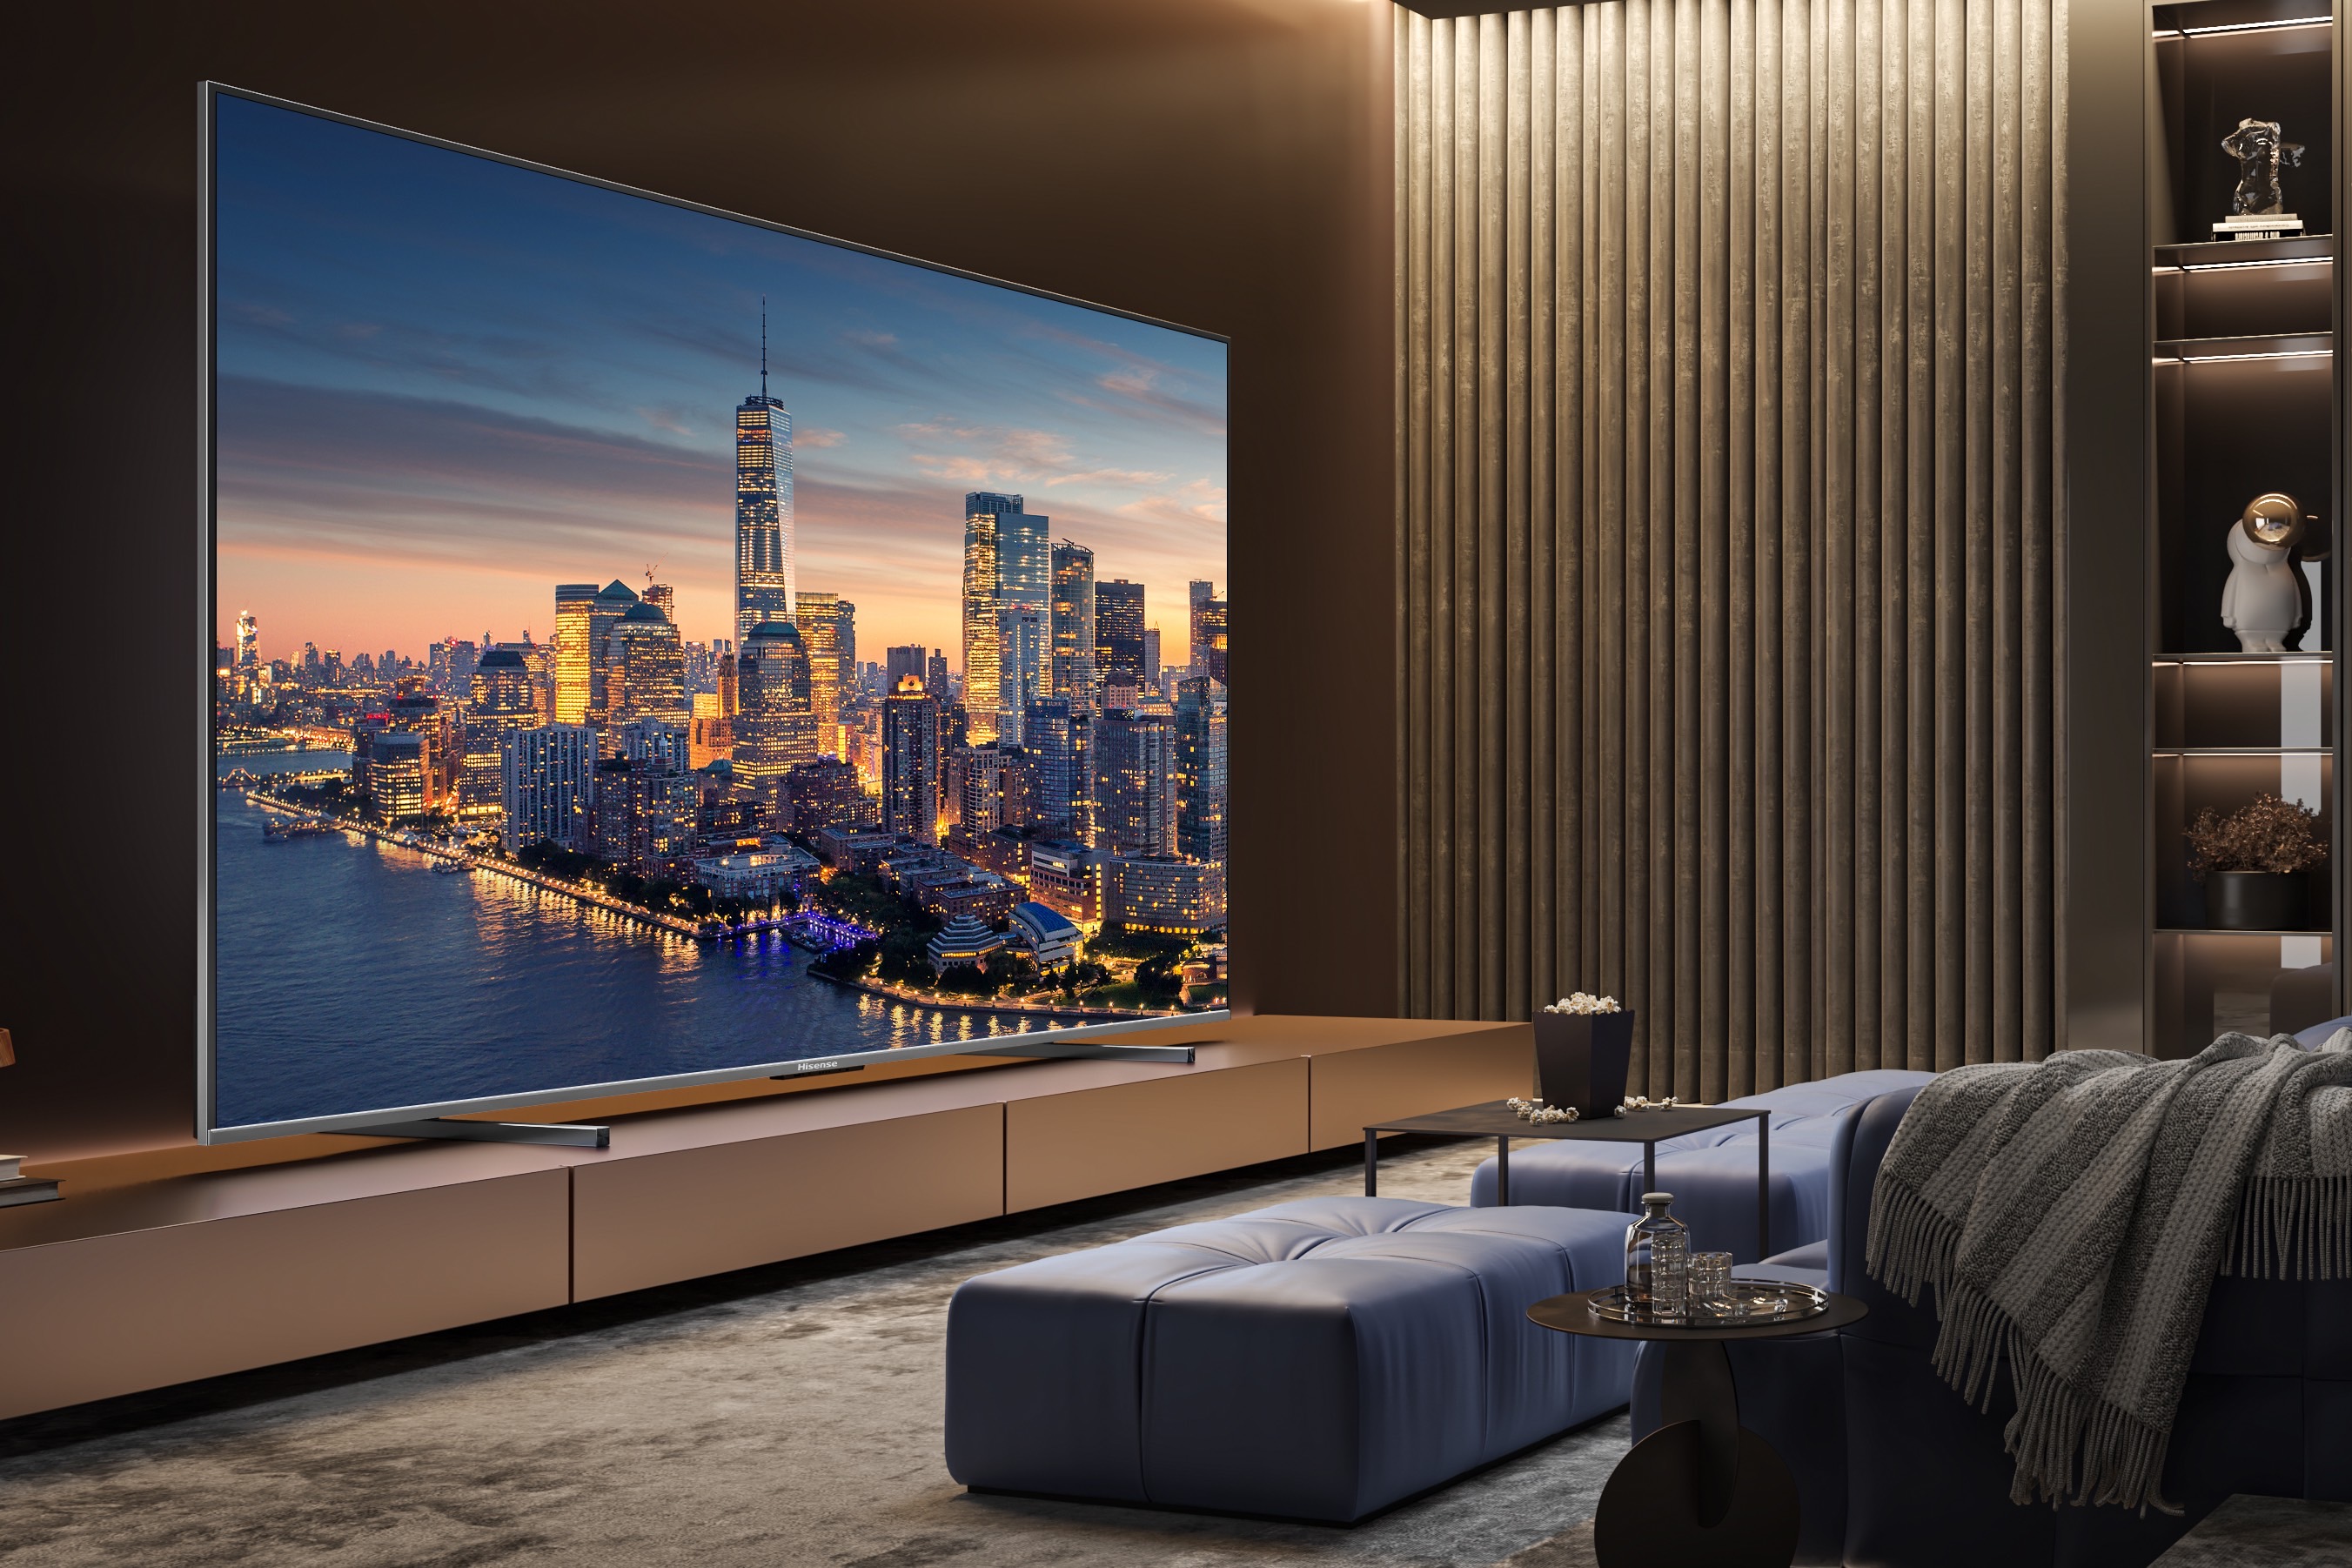 Hisense shows off massively bright 98- and 100-inch TVs at CES 